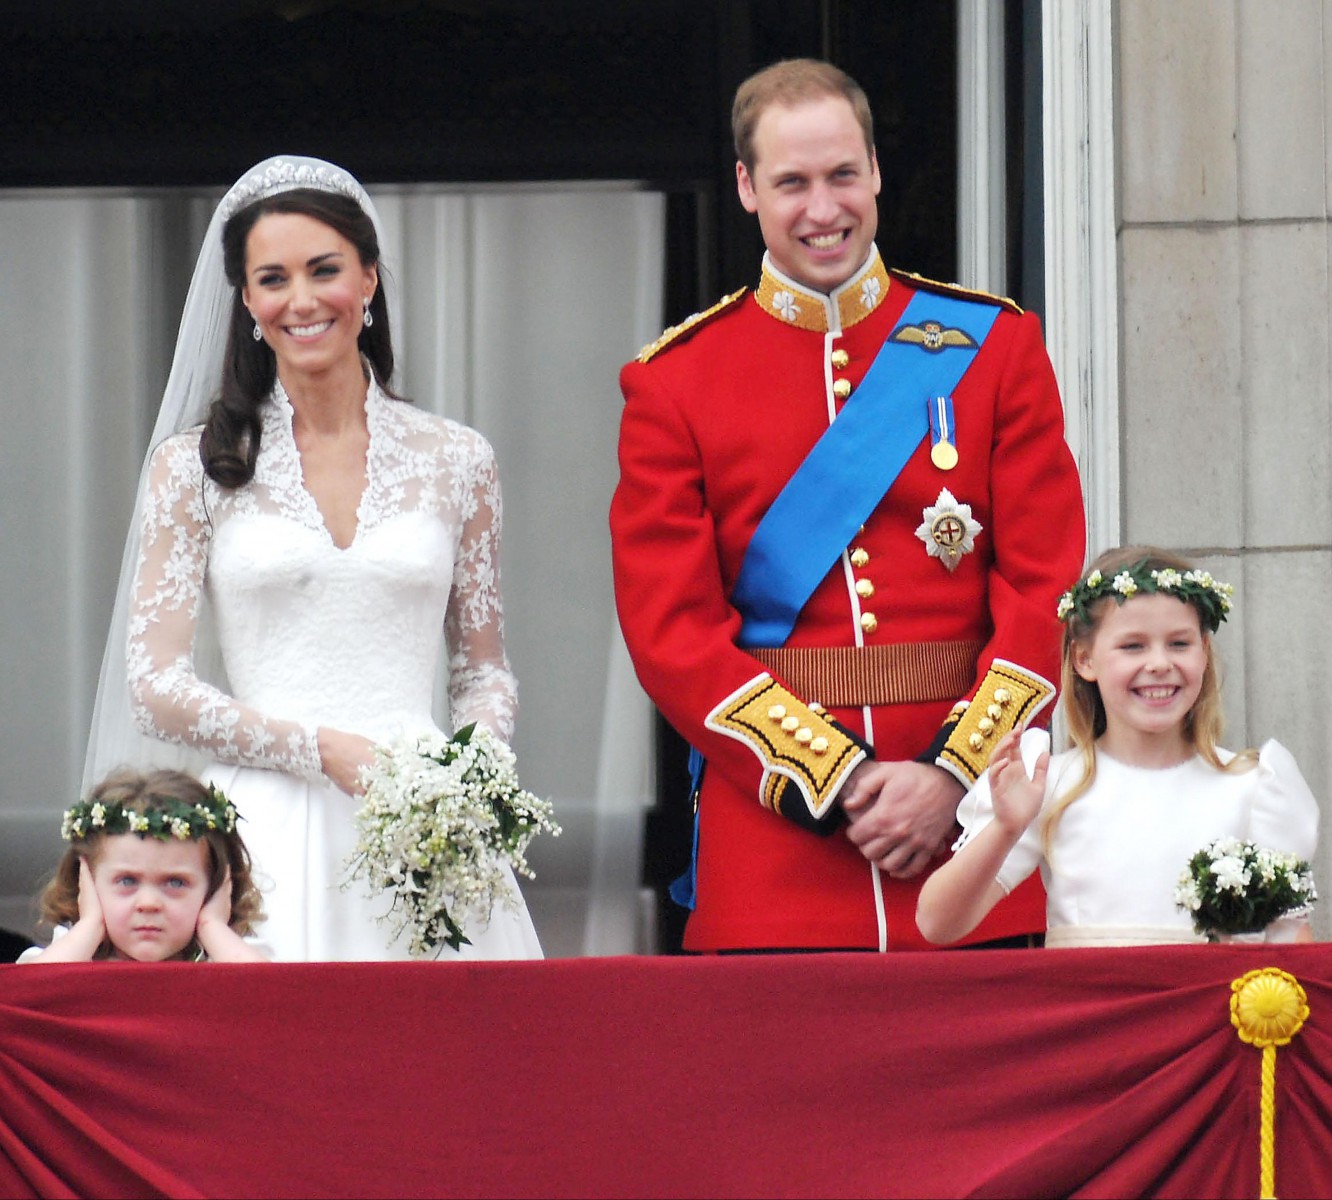 Florence's older sister Grace covered her ears as the audience cheered for Prince William and Kate on their wedding day